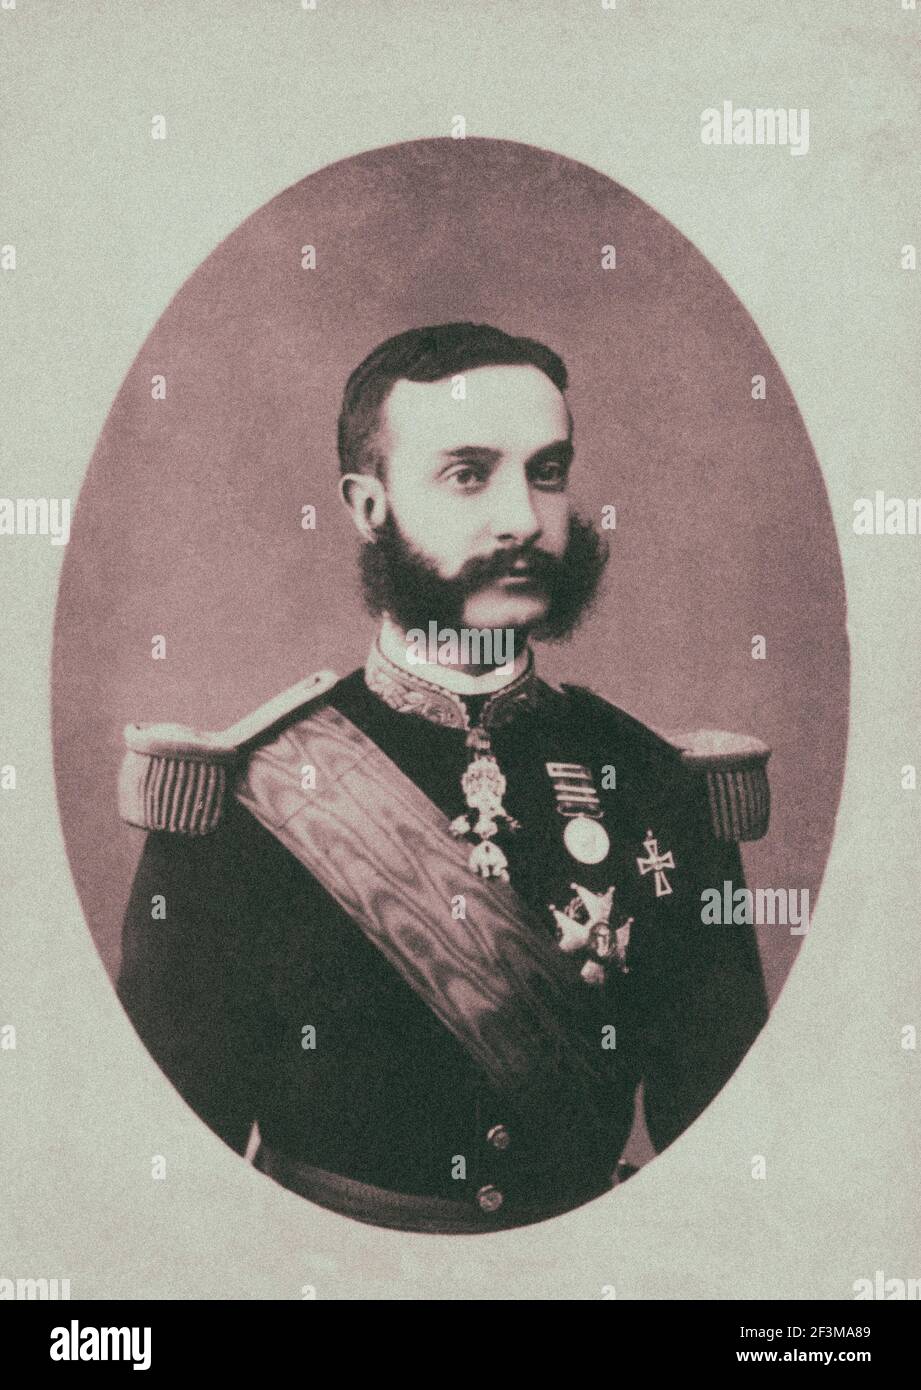 Alfonso XII (1857 – 1885), also known as El Pacificador or the Peacemaker, was King of Spain, reigning from 1874 to 1885. After a revolution that depo Stock Photo